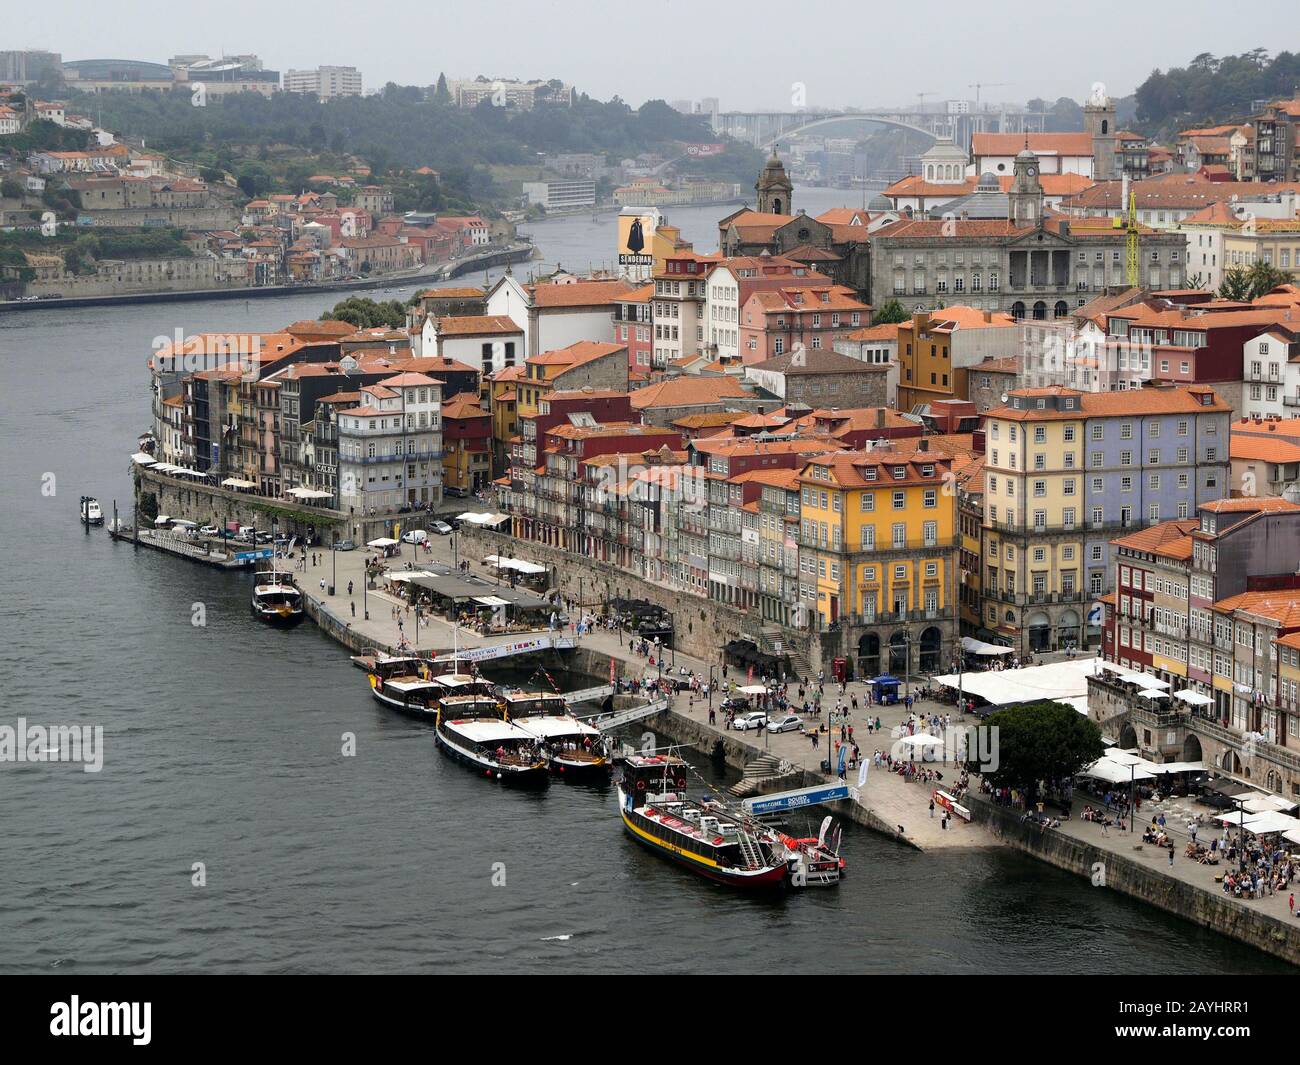 Part of the historic city center of Porto, Portugal, with tourist boats on the Douro river Stock Photo